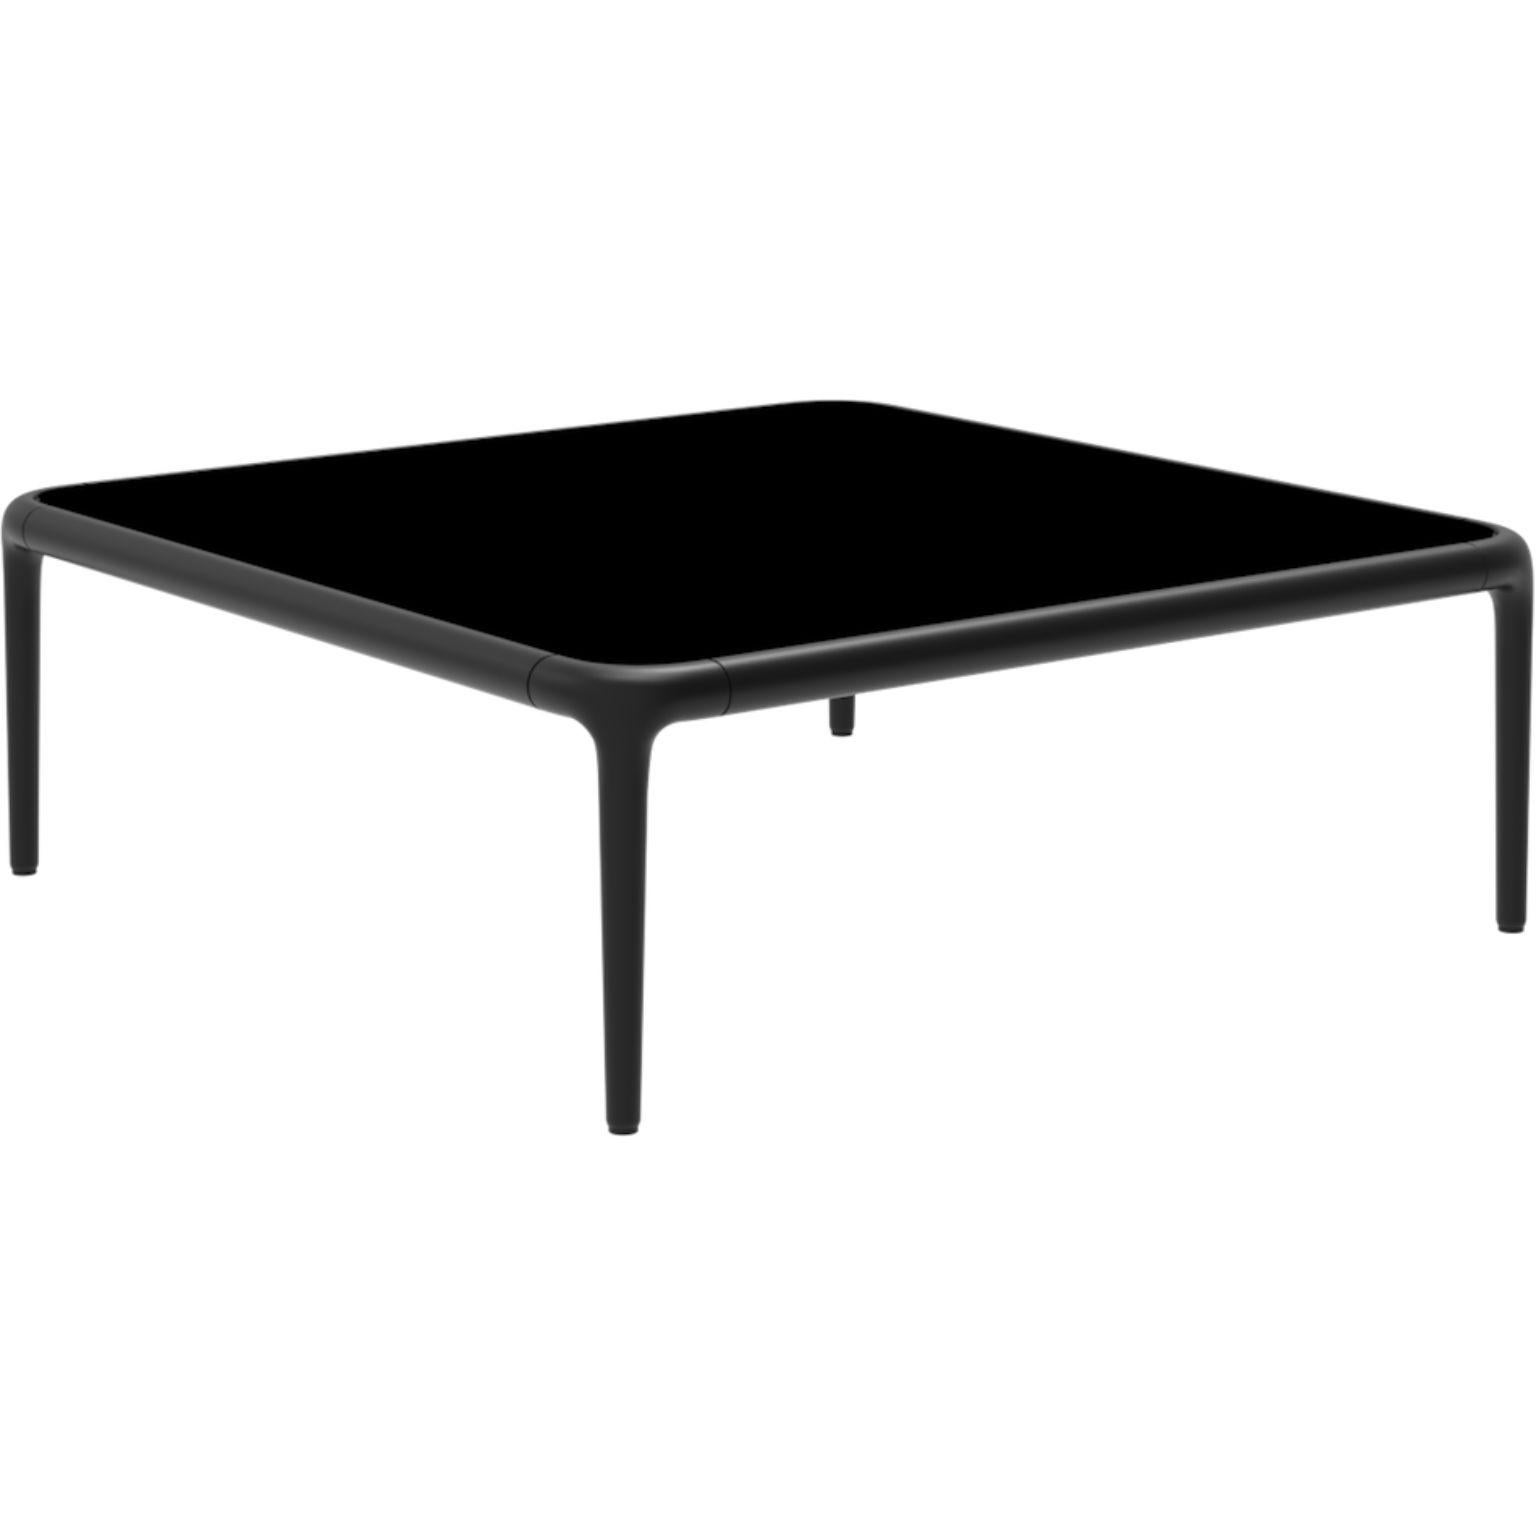 Xaloc black coffee table 80 with glass top by Mowee.
Dimensions: D80 x W80 x H28 cm.
Materials: Aluminum, tinted tempered glass top.
Also available in different aluminum colors and finishes (HPL Black Edge or Neolith). 

Xaloc synthesizes the